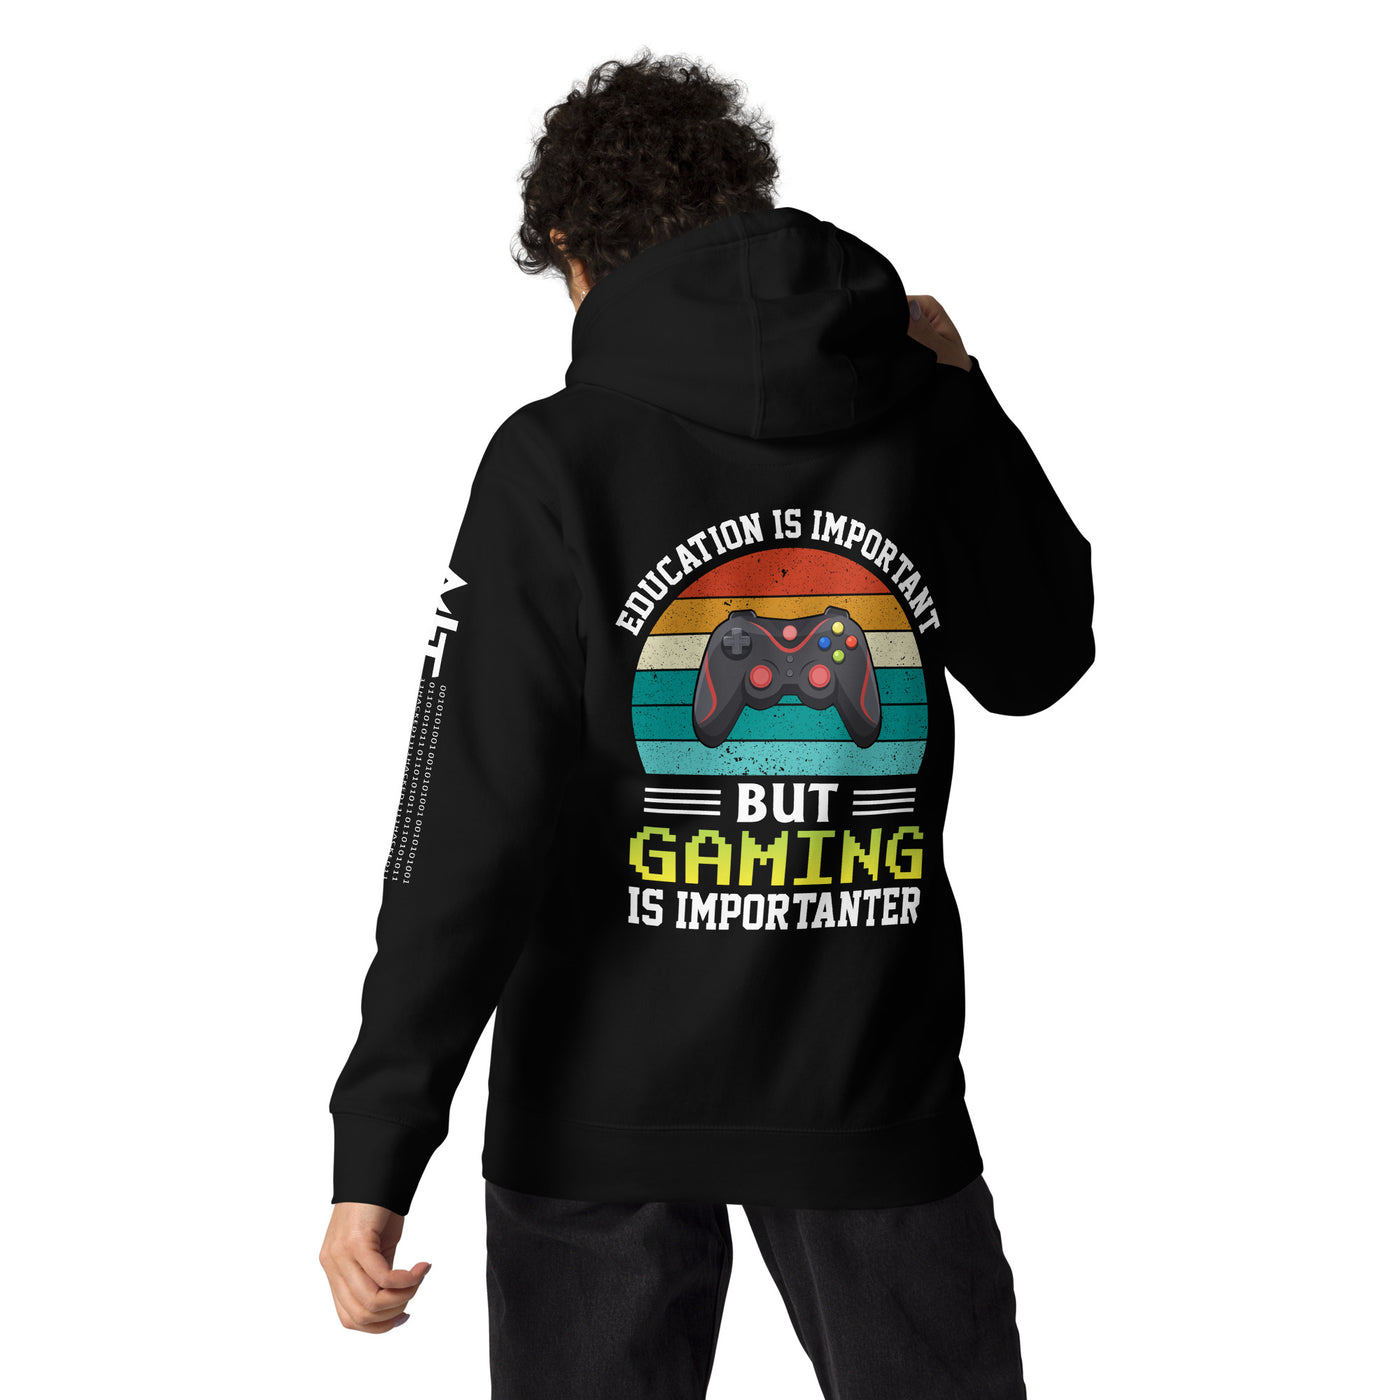 Education is Important, but Gaming is importanter - Unisex Hoodie ( Back Print )